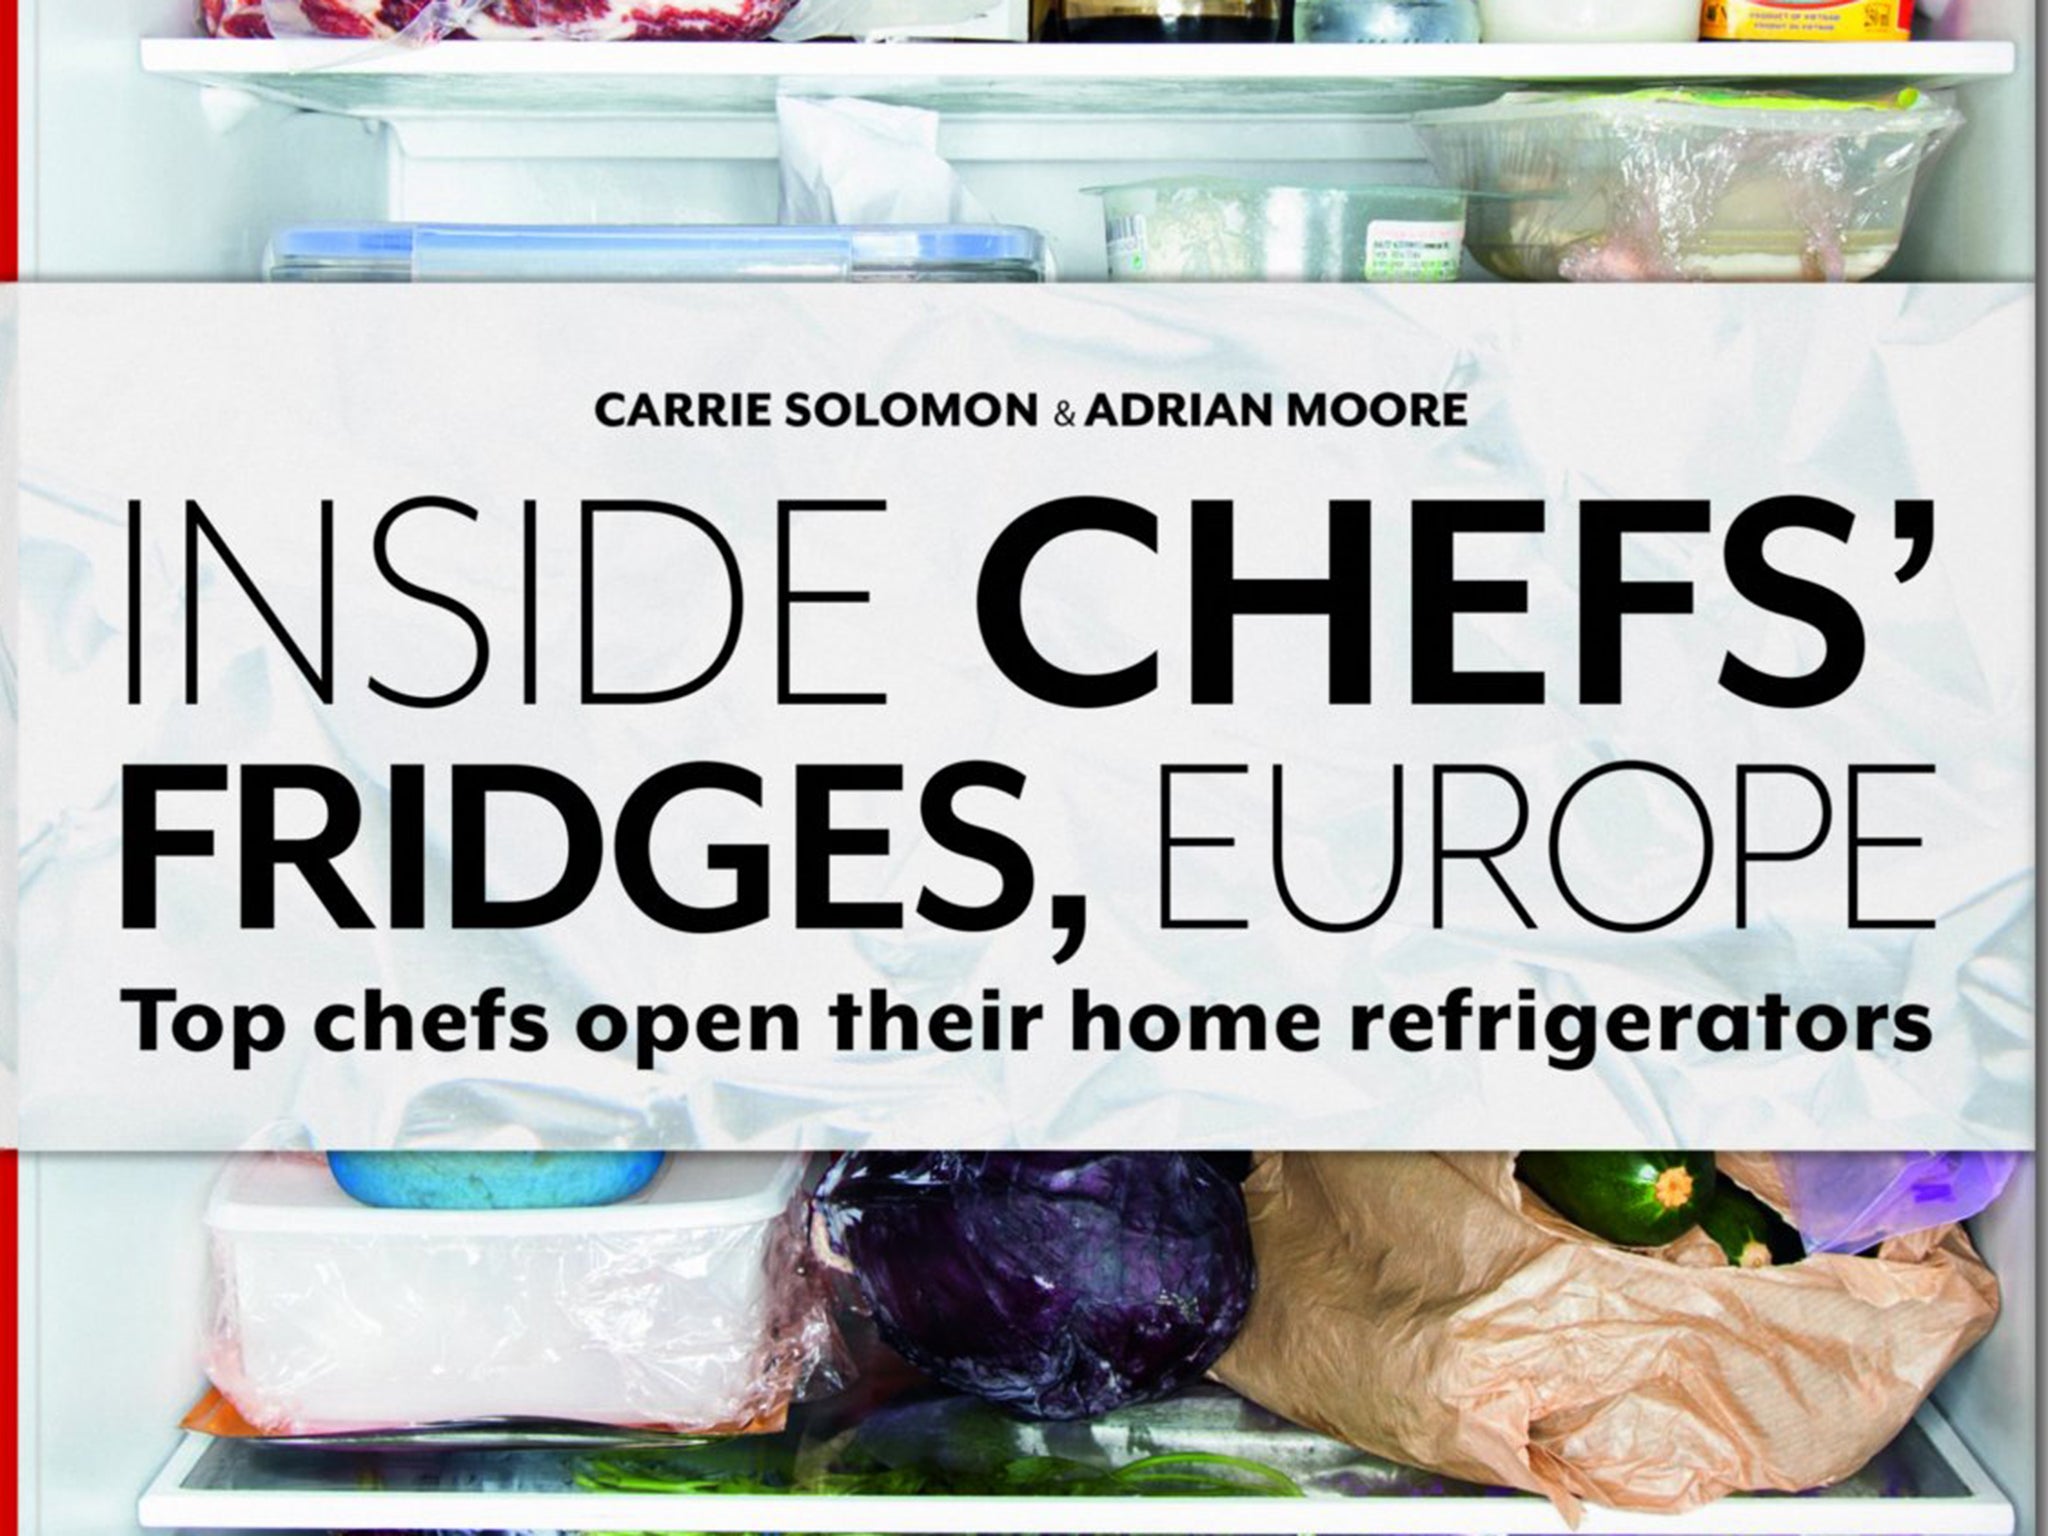 Authors Carrie Solomon and Adrian Moore travelled around Europe photographing the refrigerators of top chefs for the book "Inside Chefs’ Fridges, Europe"